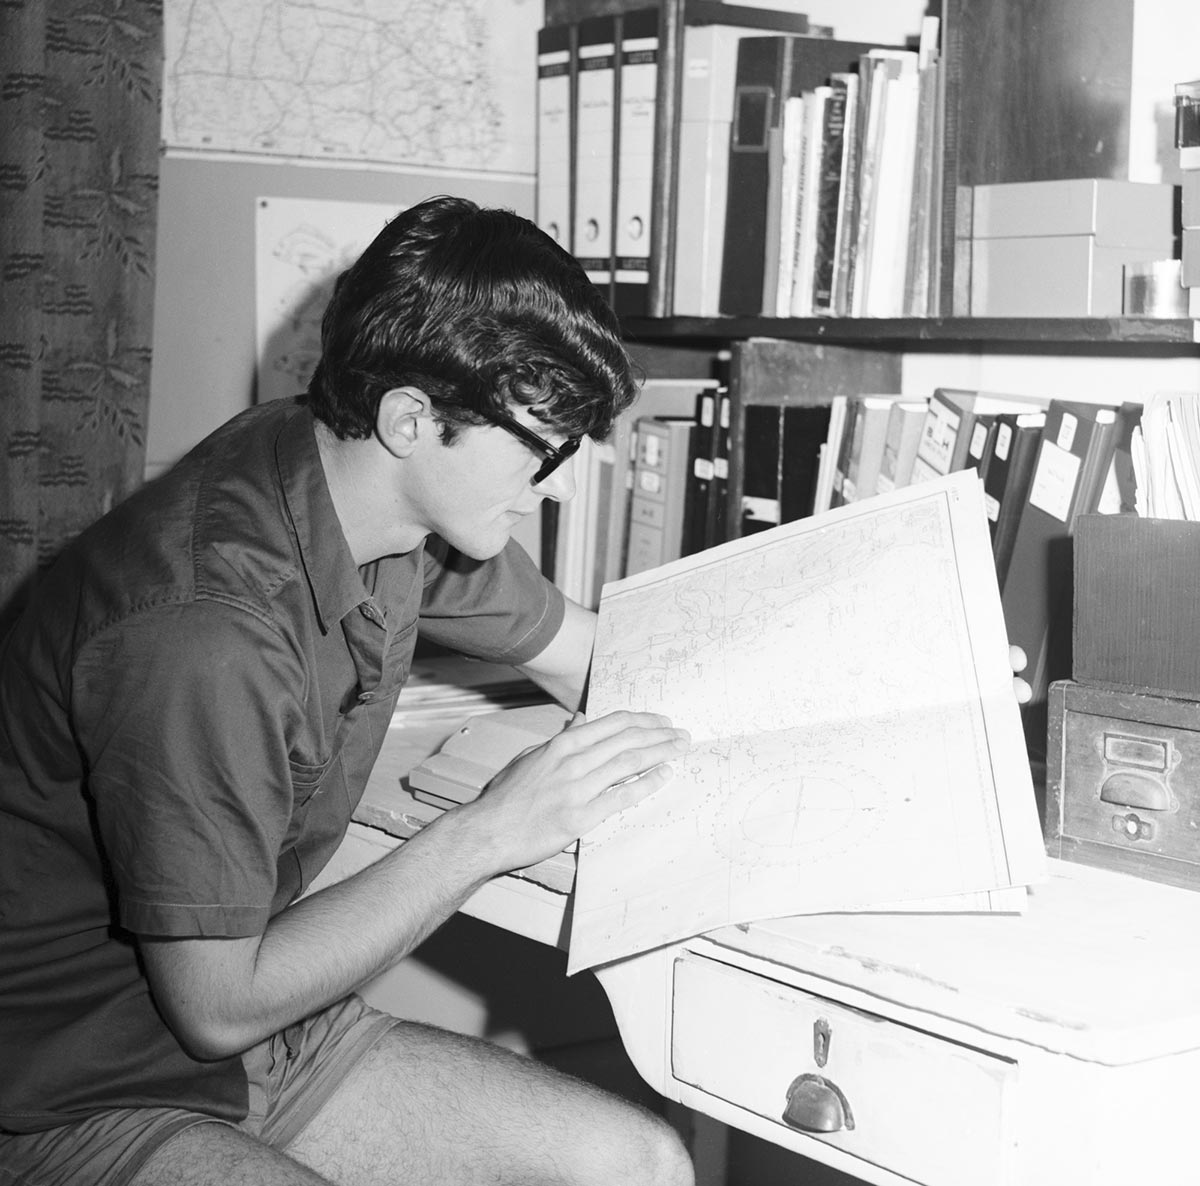 Young man with glasses seated at desk examining large book, possibly an atlas. - click to view larger image